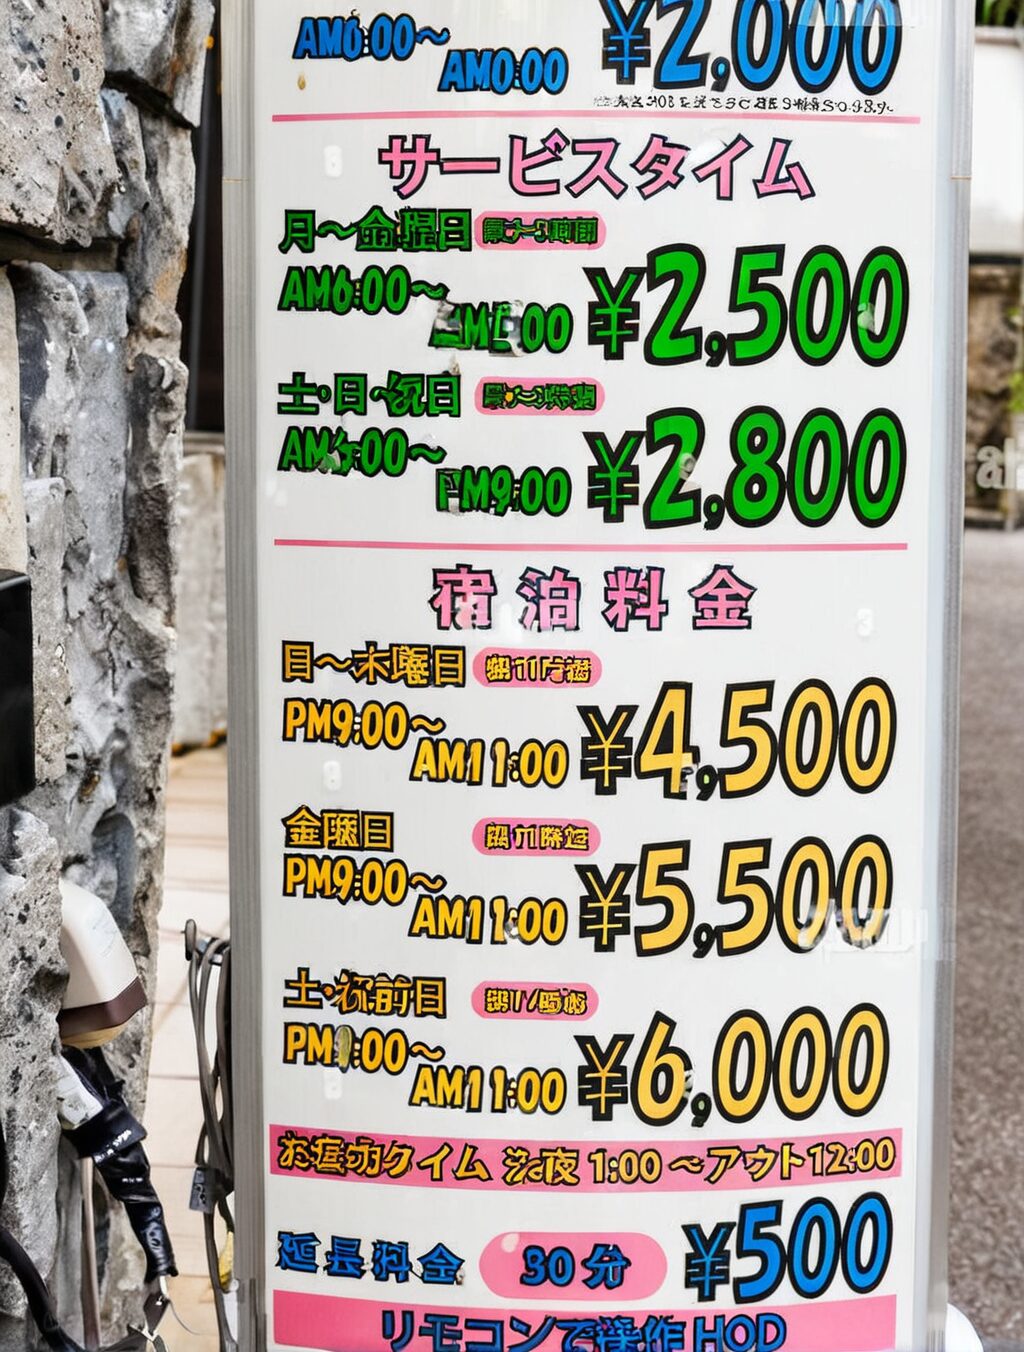 how much yen is a hotel in japan